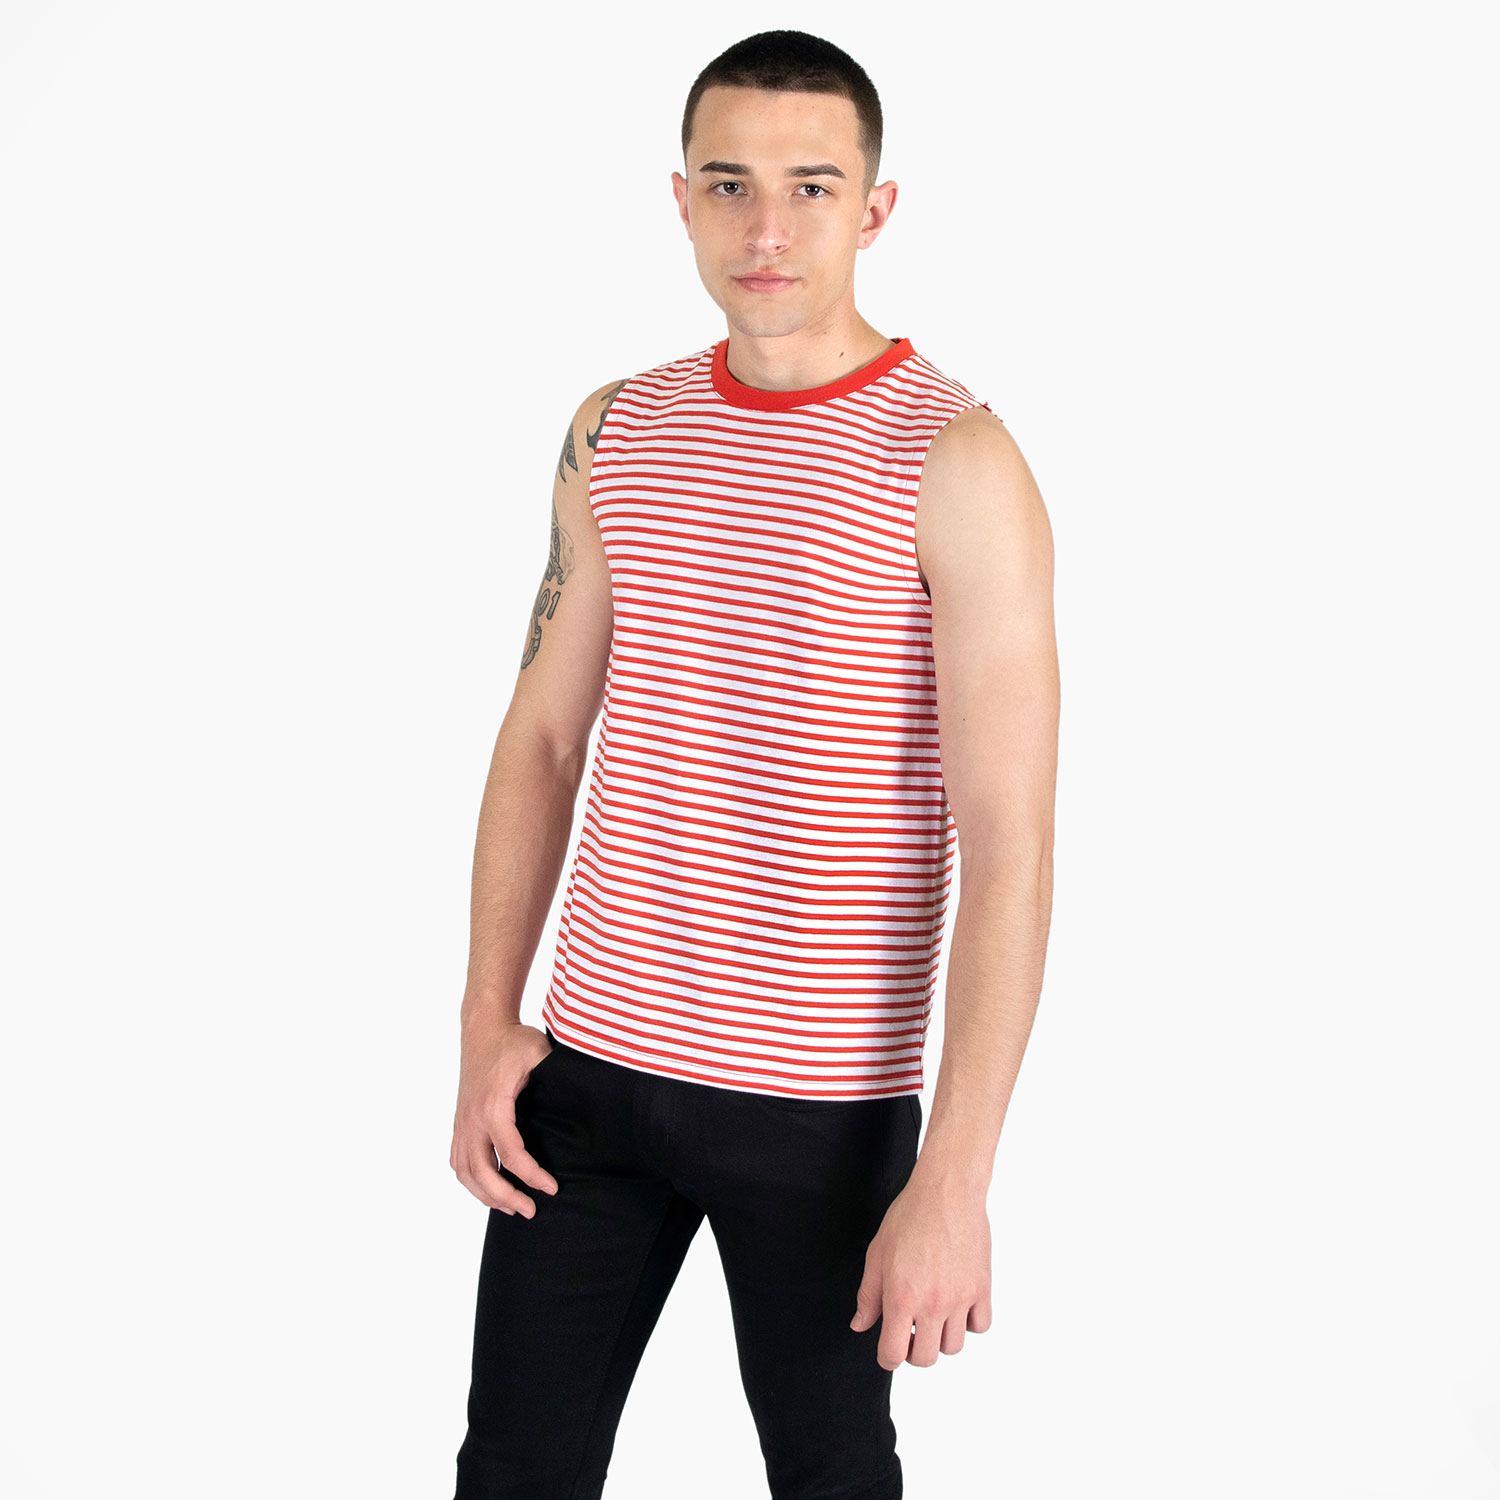 Diego - Red and White Striped Tank Top | Straight To Hell Apparel